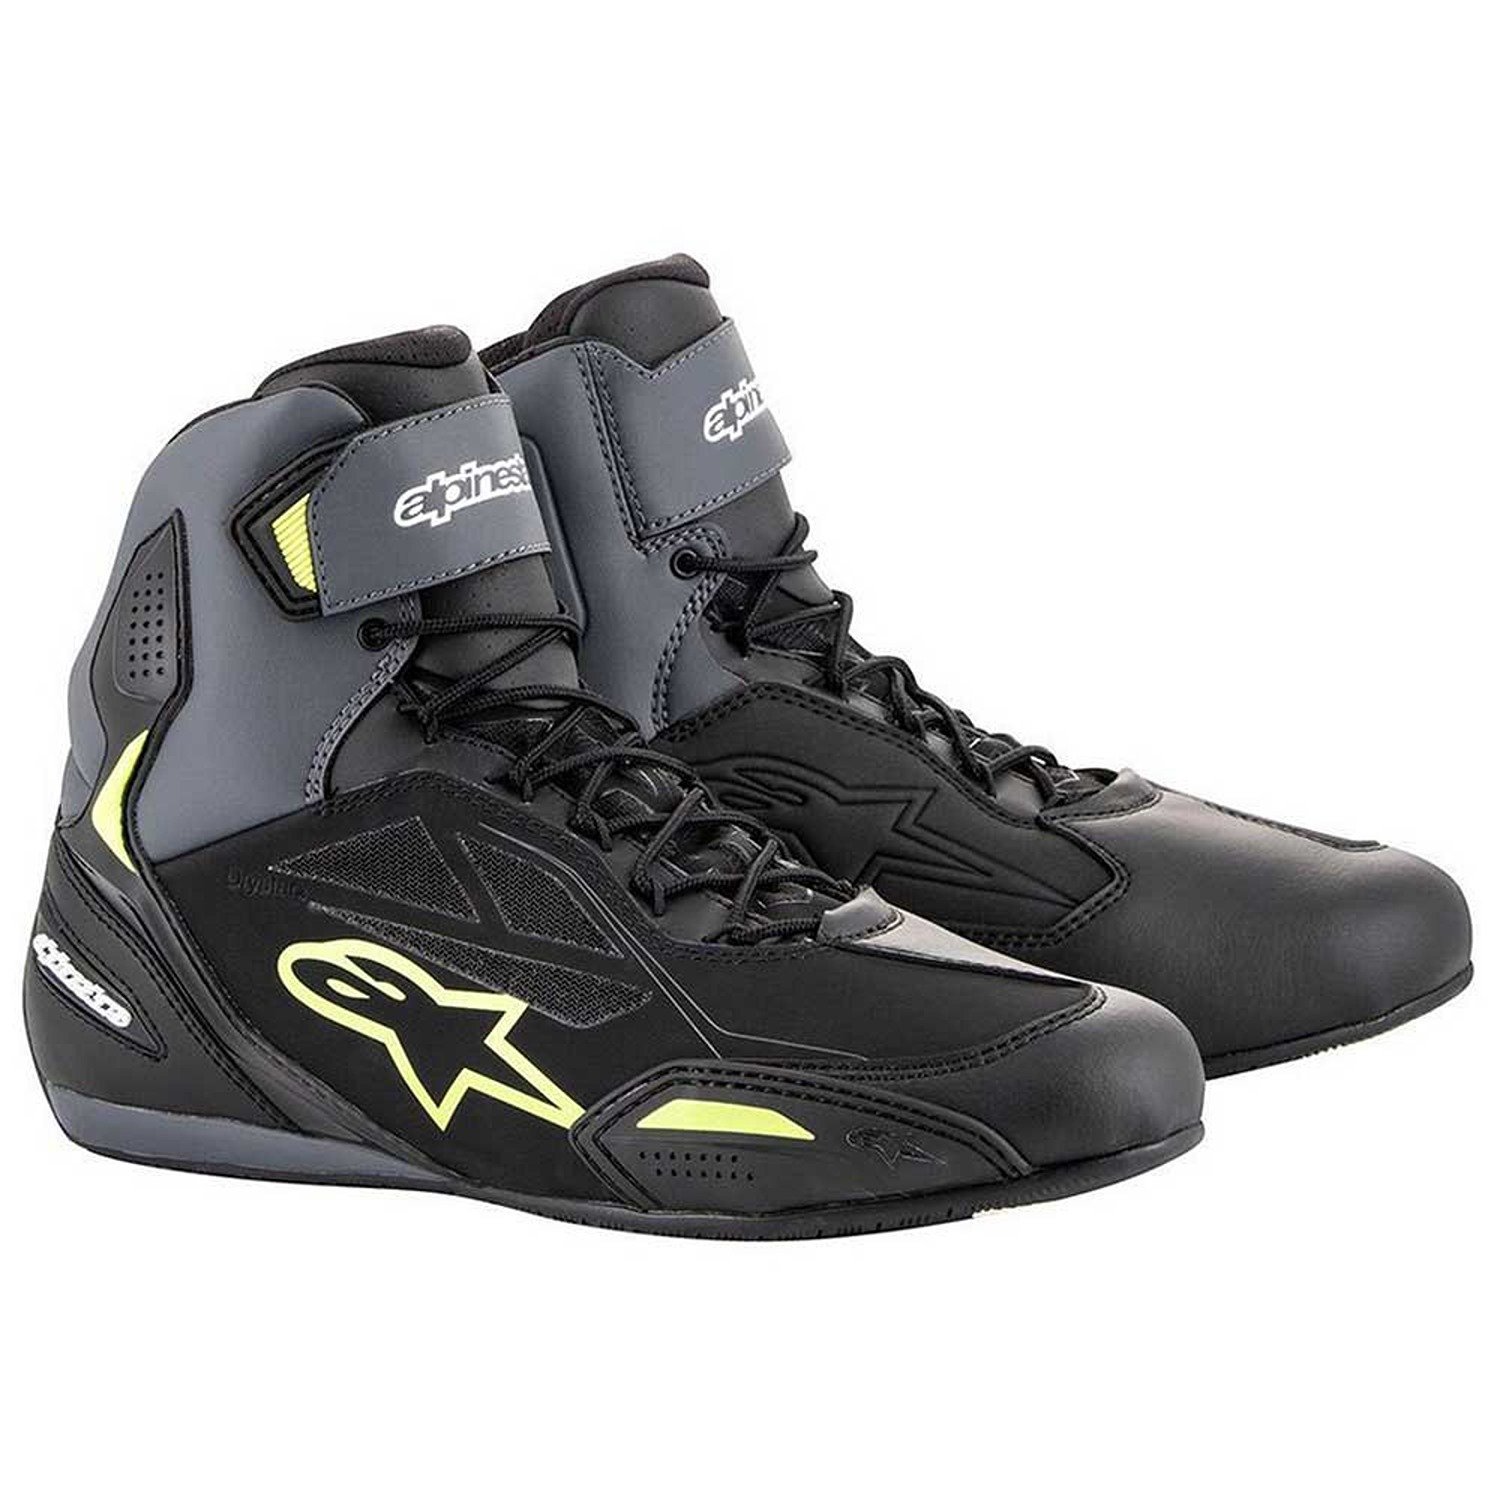 Image of Alpinestars Faster-3 Shoes Black Yellow Fluo Size US 65 ID 8059347331041